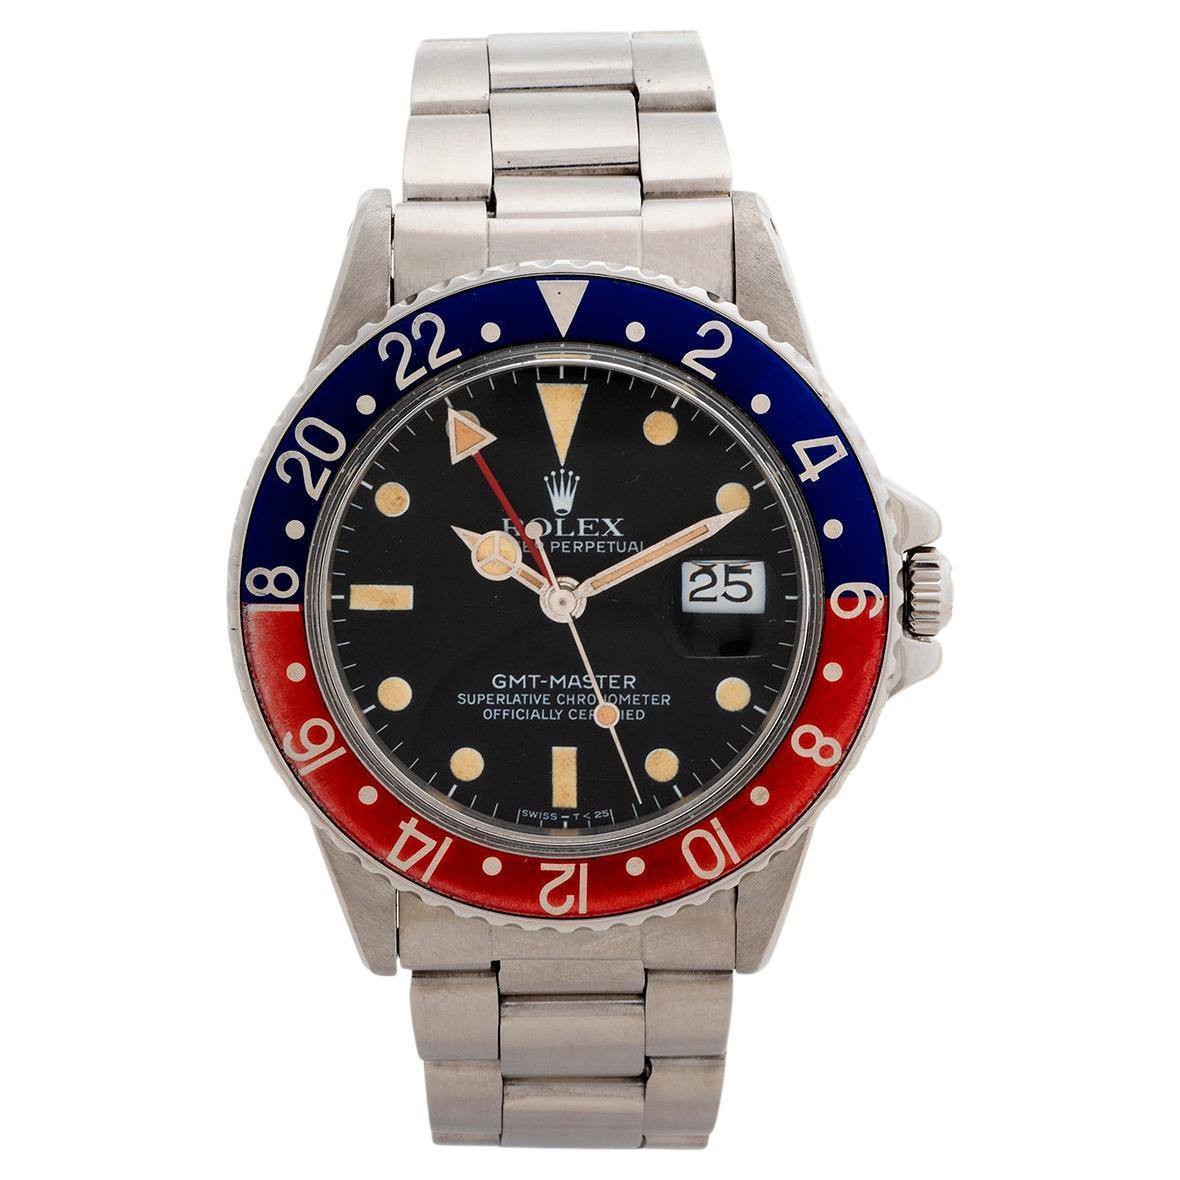 Our vintage and rare Rolex GMT Master is a transitional reference 16750, is a particularly attractive example; with original and coeval patination to the matte tritium dial and hands, gently faded red/ blue pepsi bezel insert and date matched serial